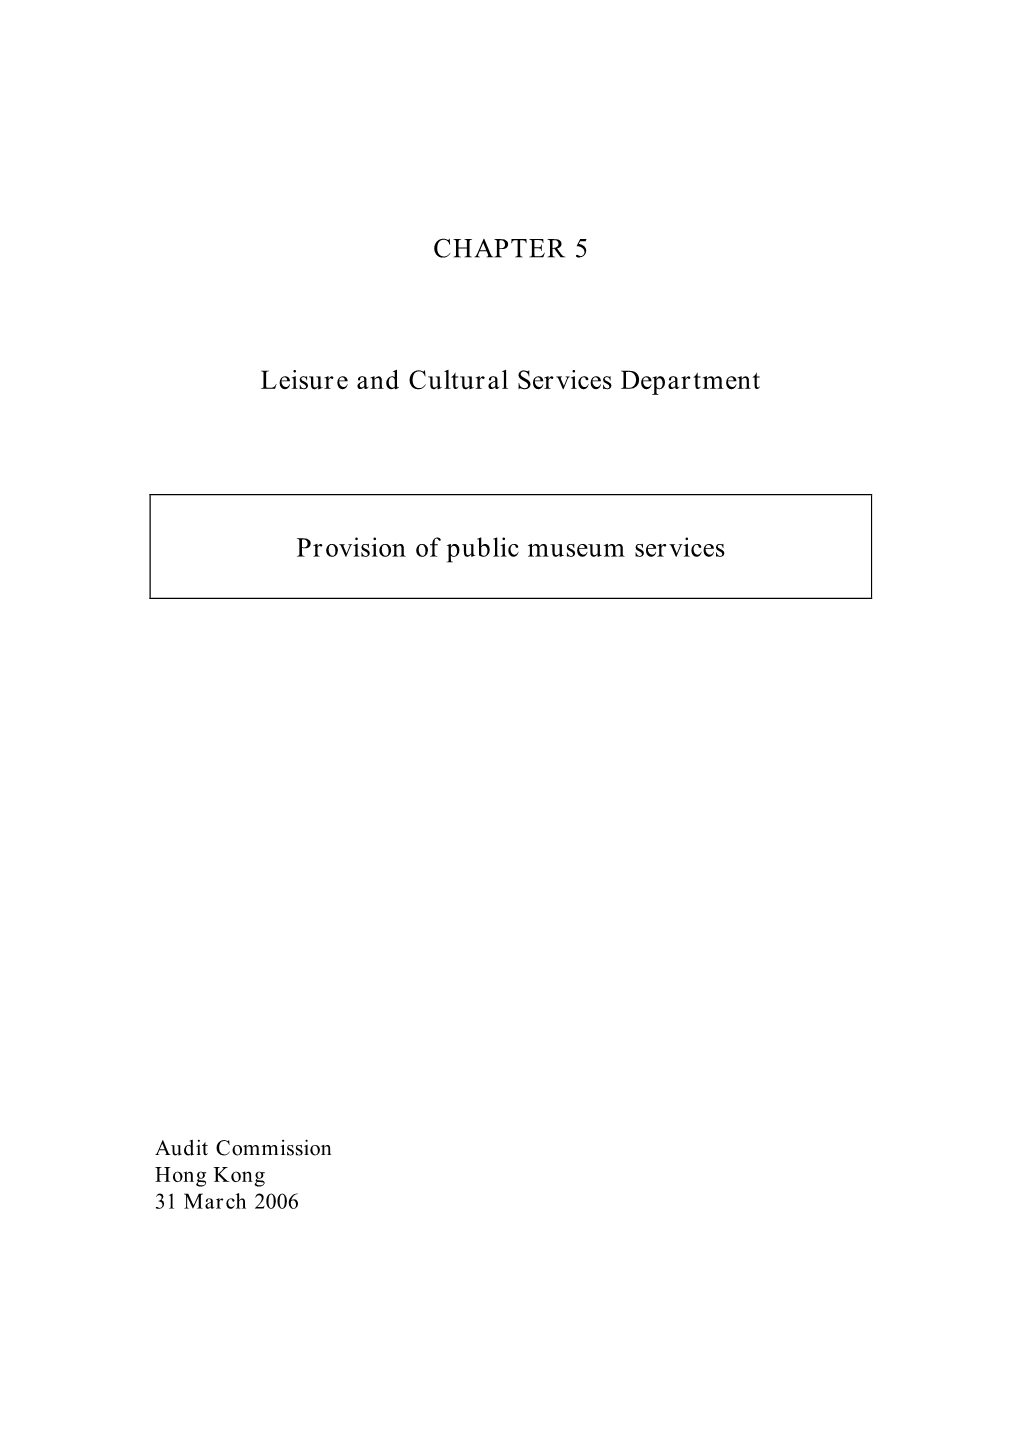 CHAPTER 5 Leisure and Cultural Services Department Provision Of